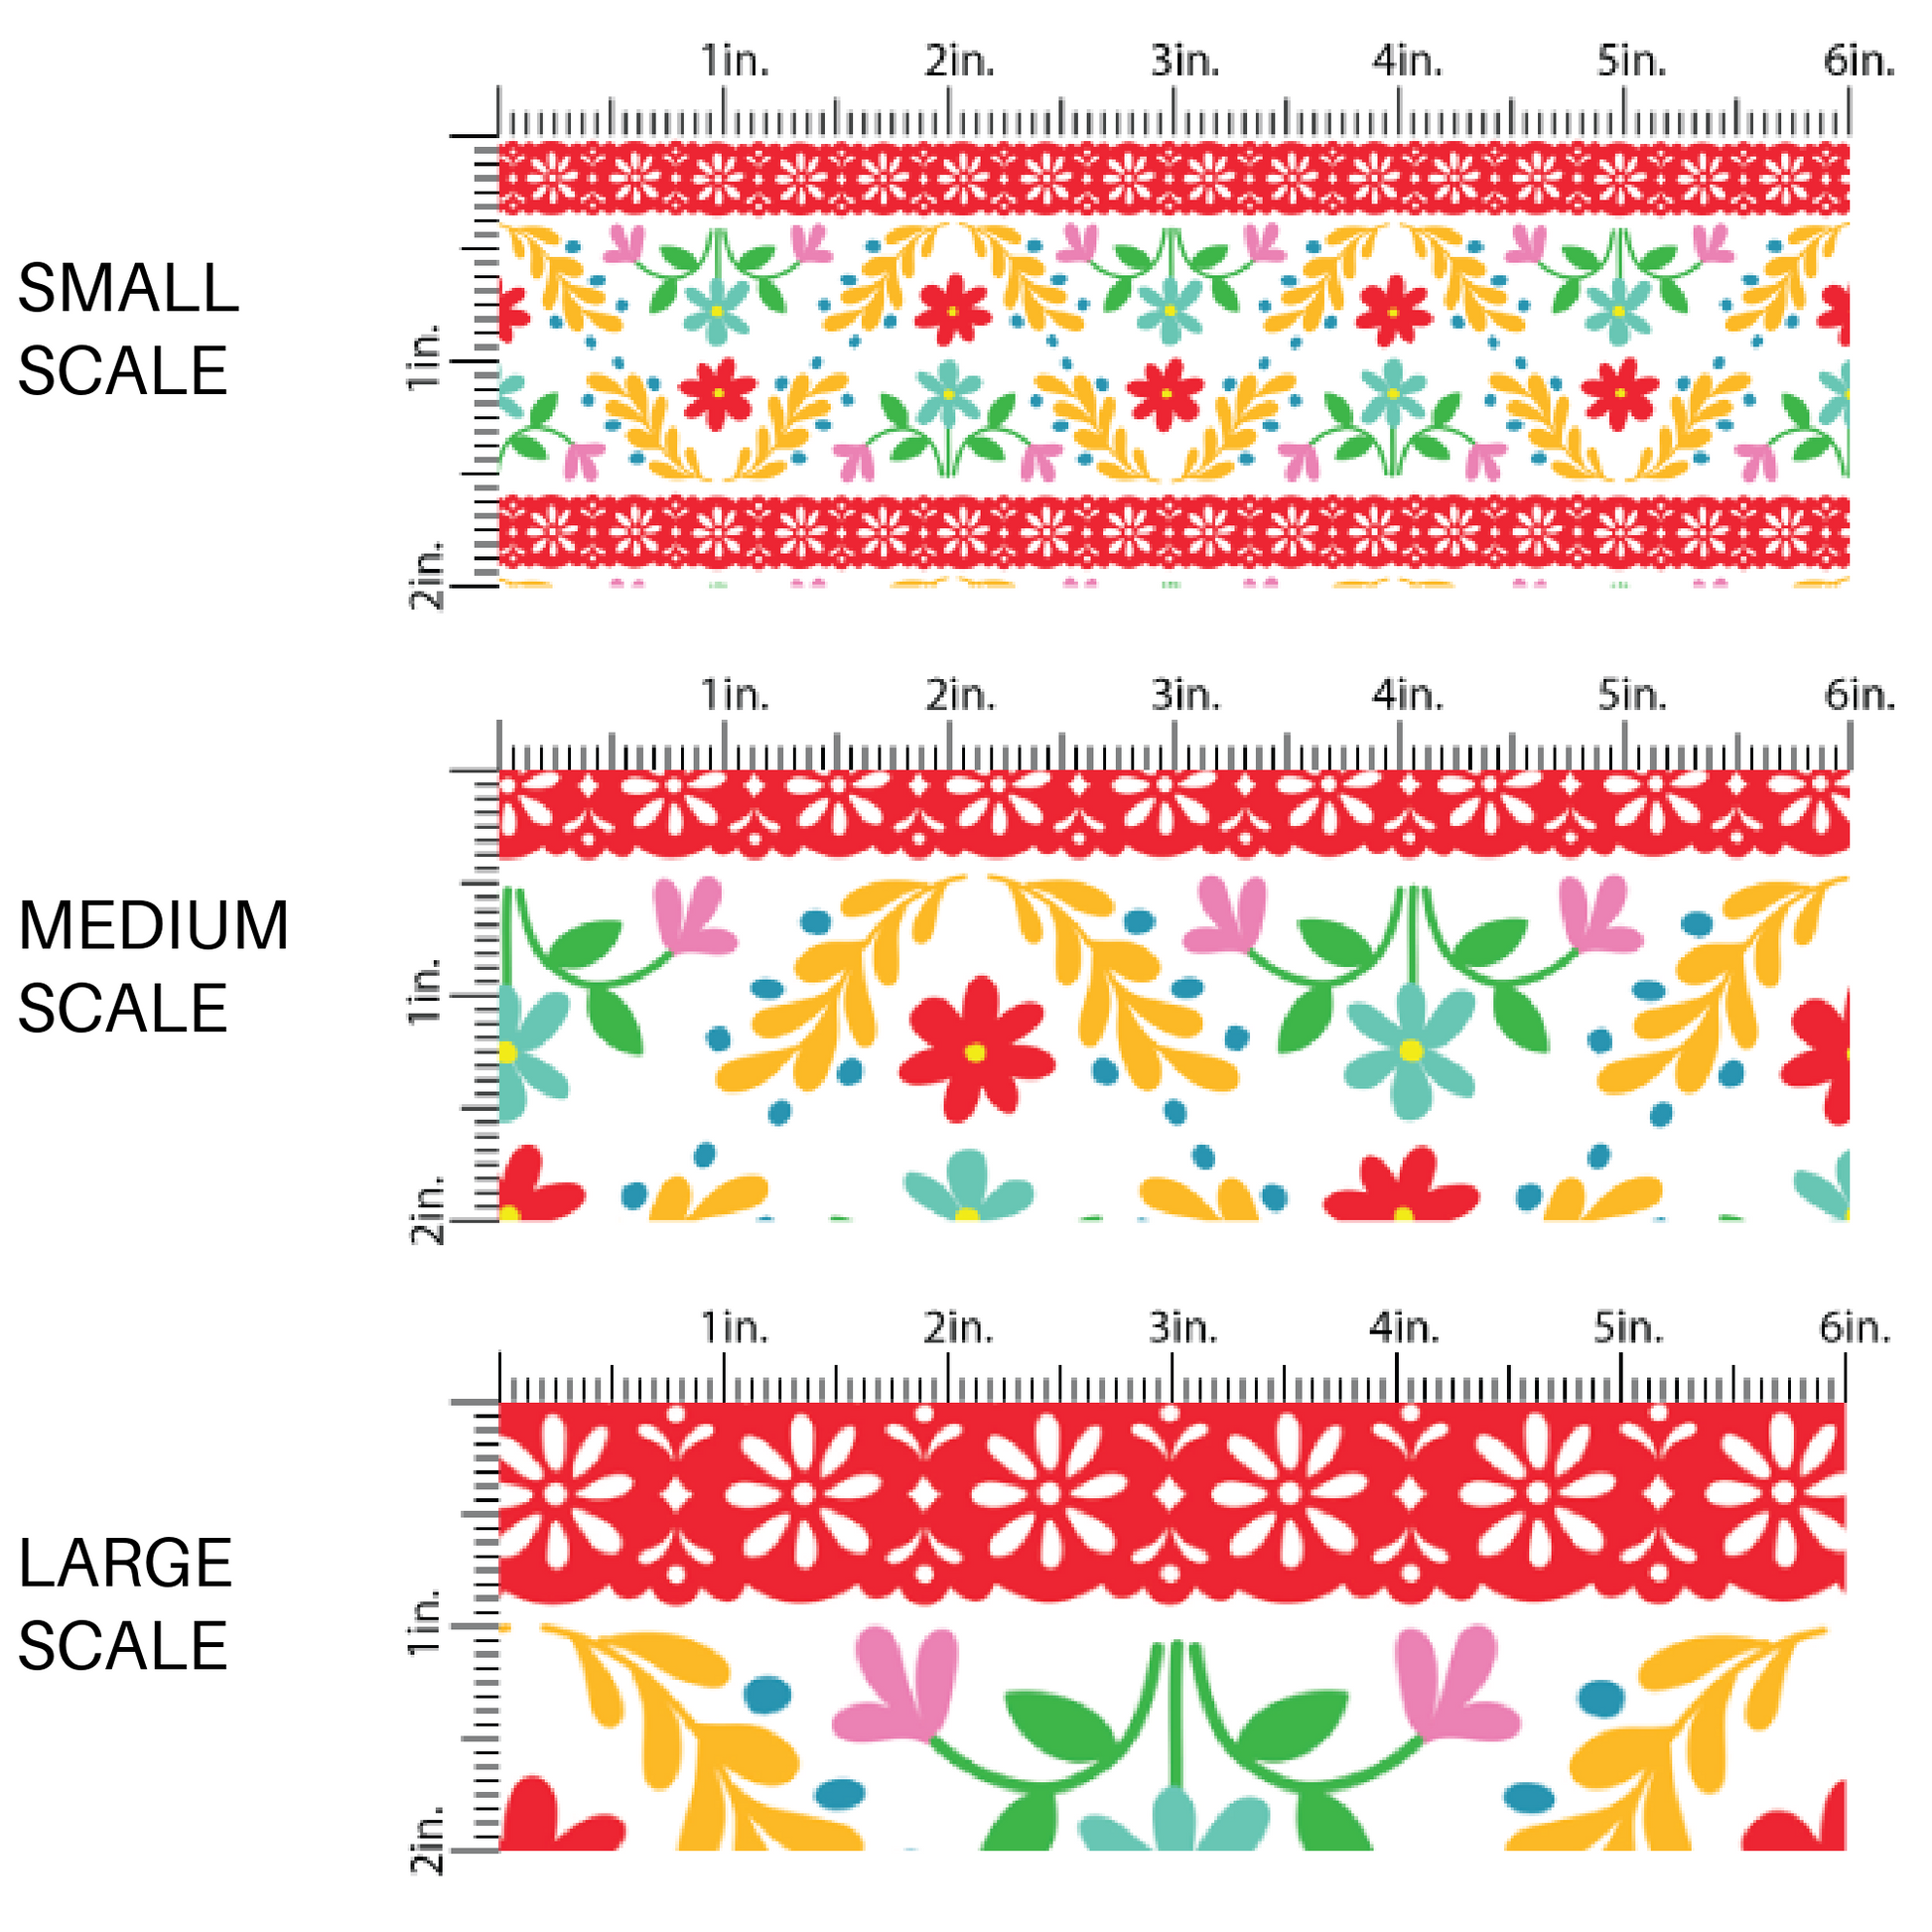 Multi-Colored Floral Papel Picado Fabric by the Yard scaled image guide.